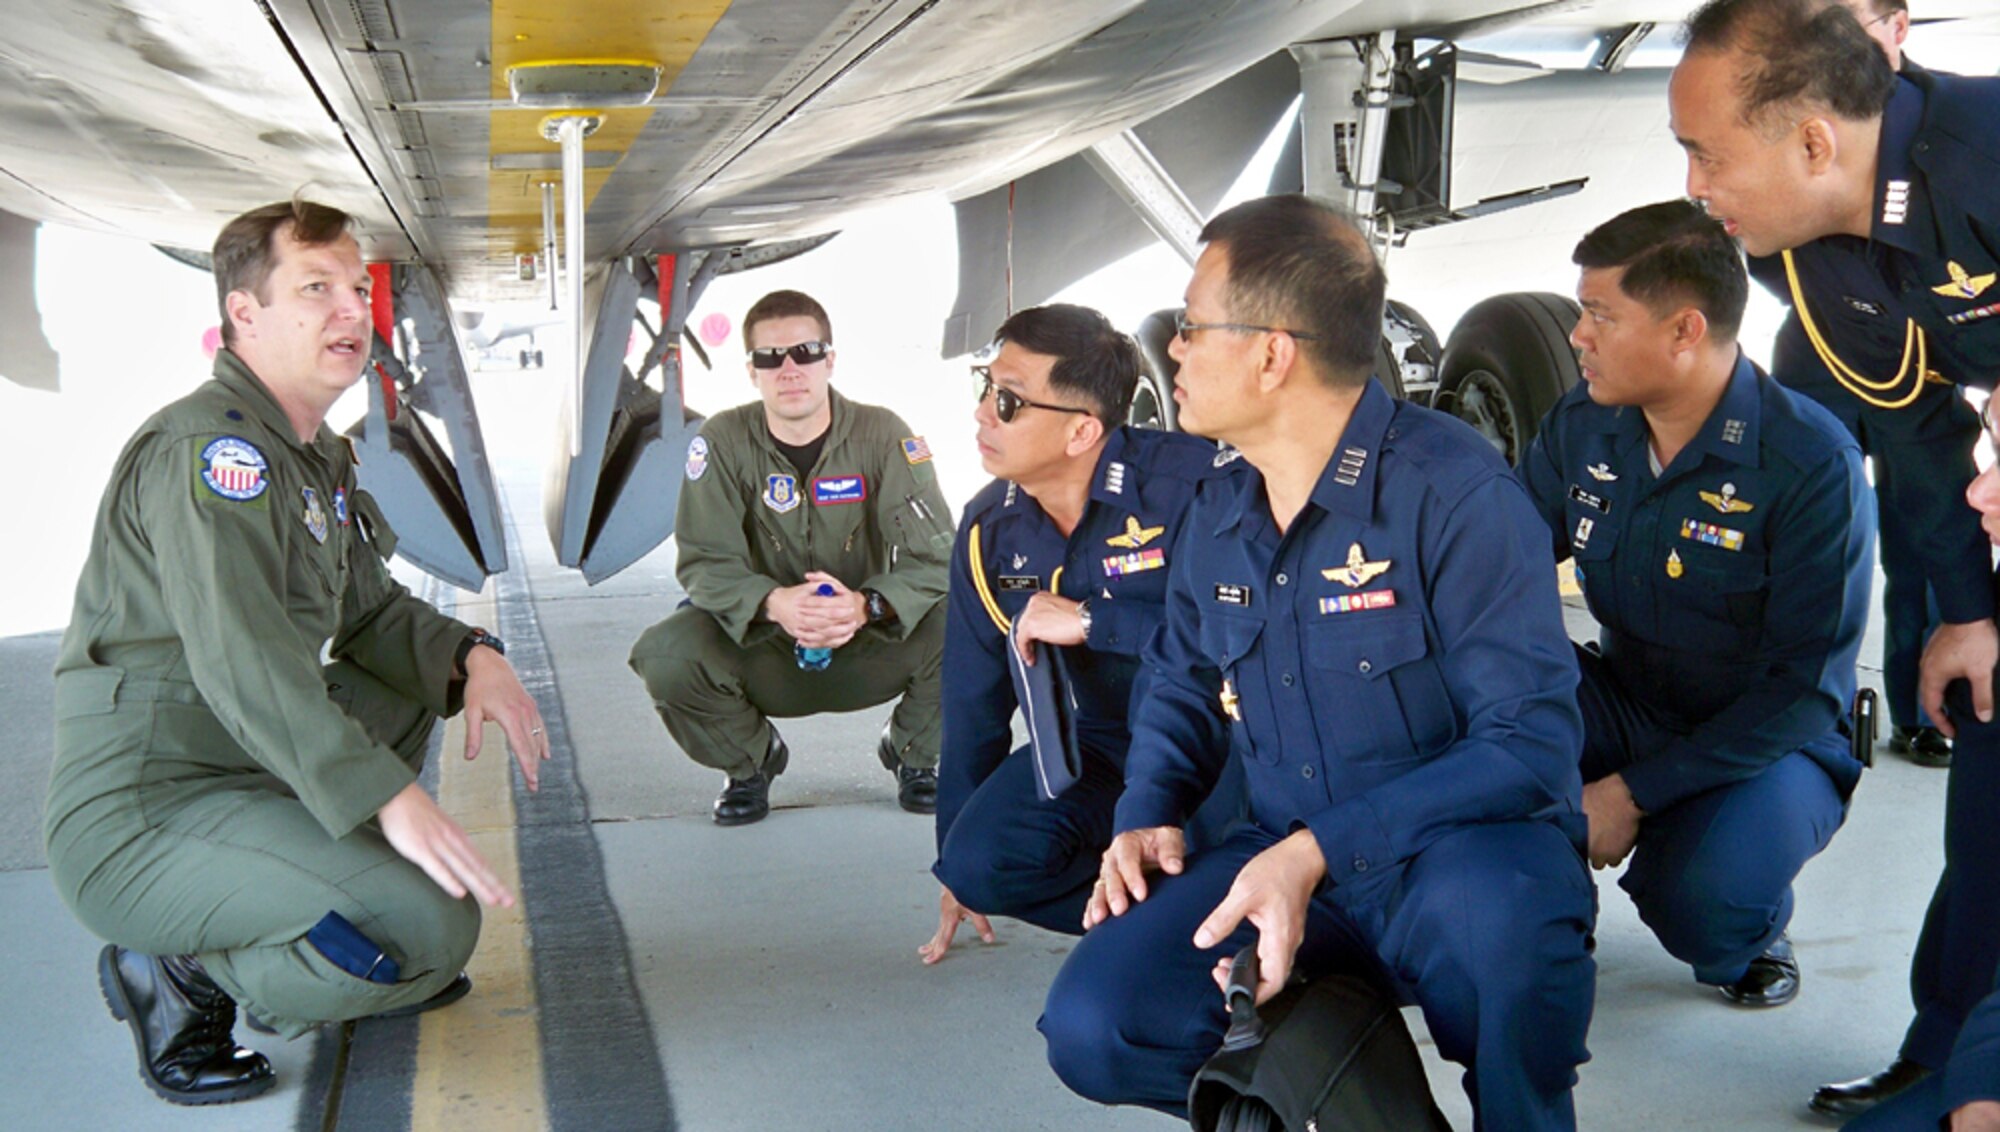 Lt. Col. Dave Bell, a 336th Air Refueling Squadron pilot, explains tanker capabilities to senior air force leaders from Thailand on May 8, 2009, at March Air Reserve Base, Calif. The visitors received a briefing on Air Force Reserve Command from the 4th Air Force staff and then toured the base. The tour ended with a close-up look at a KC-135 aircraft where the Thai airmen learned more about the U.S. Air Force's air refueling operations. (U.S. Air Force photo/Master Sgt. Linda E. Welz)